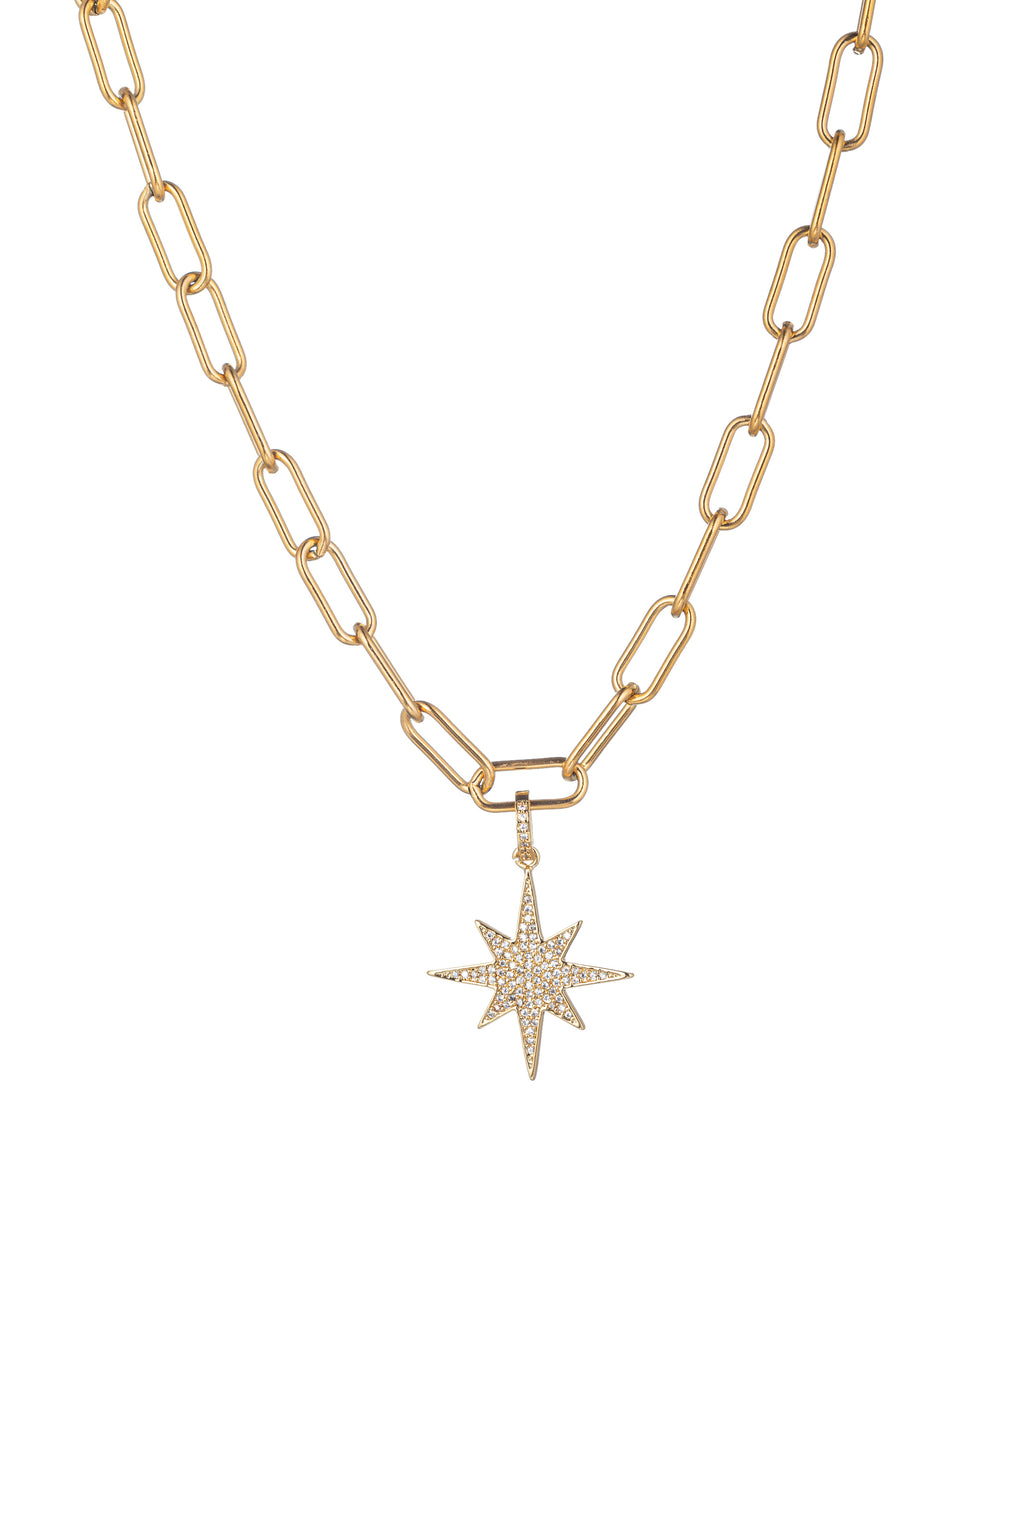 Gold tone brass paperclip necklace with a North Star pendant studded with CZ crystals.